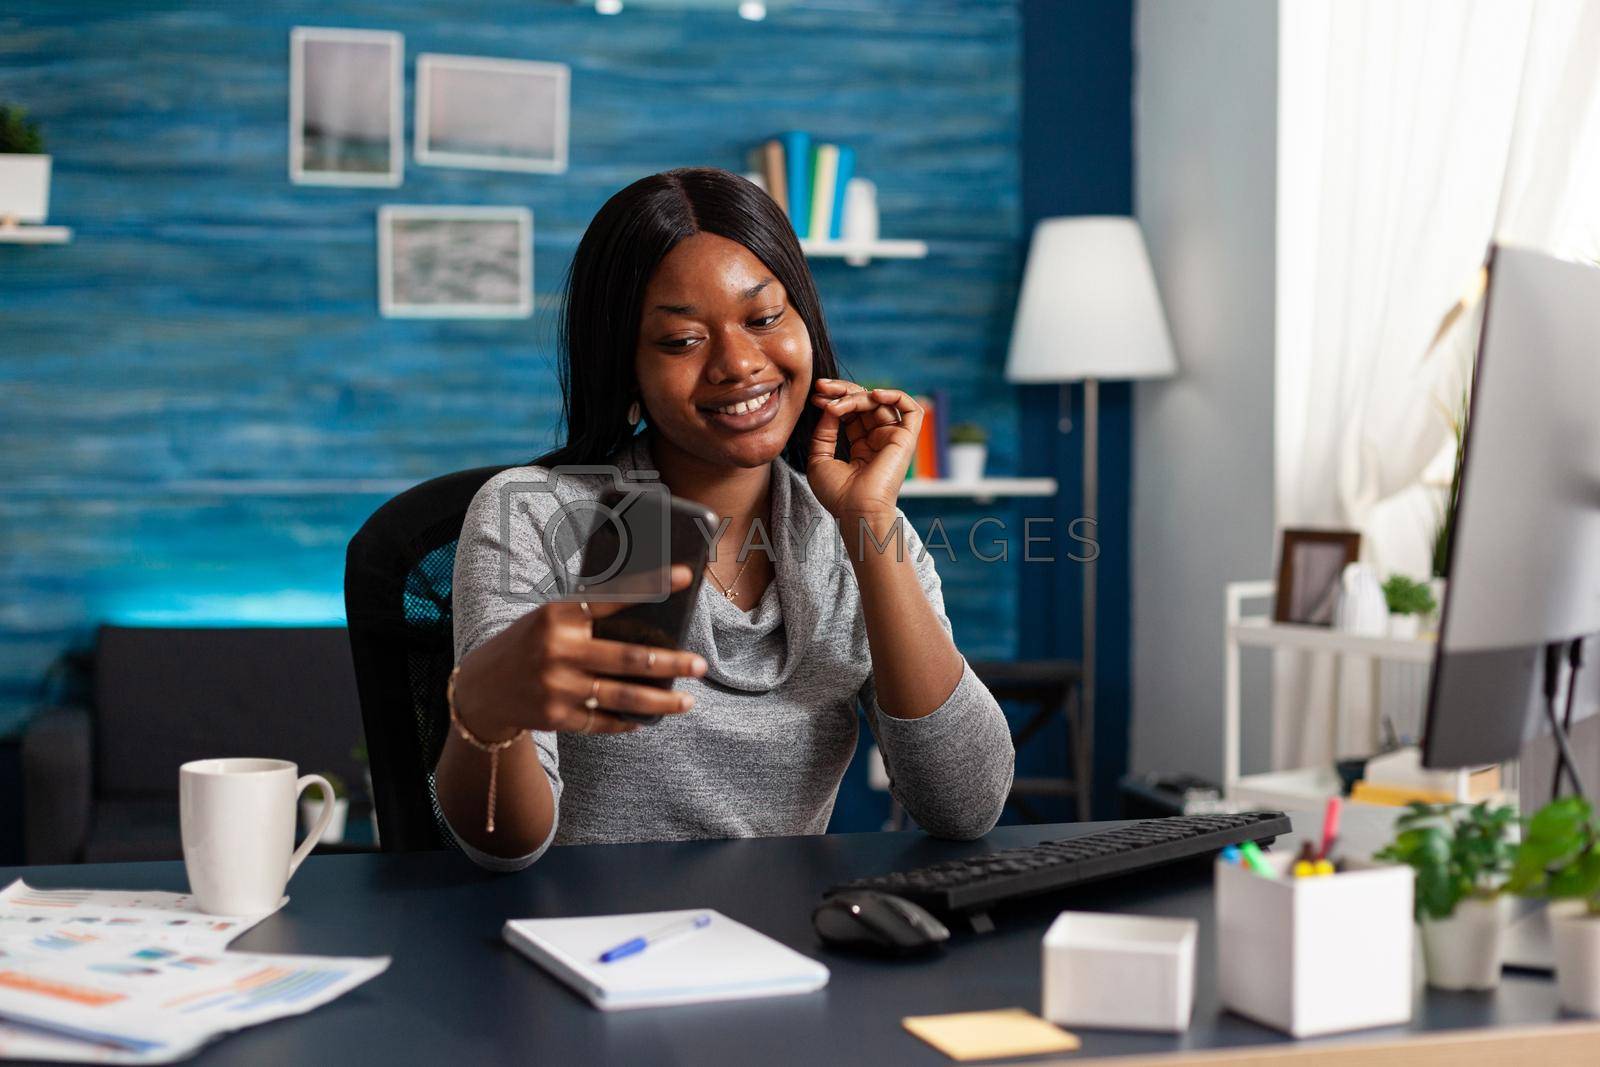 Student with dark skin discussing communication course with remote collegue during online videocall meeting conference using phone. African american woman working remote from home